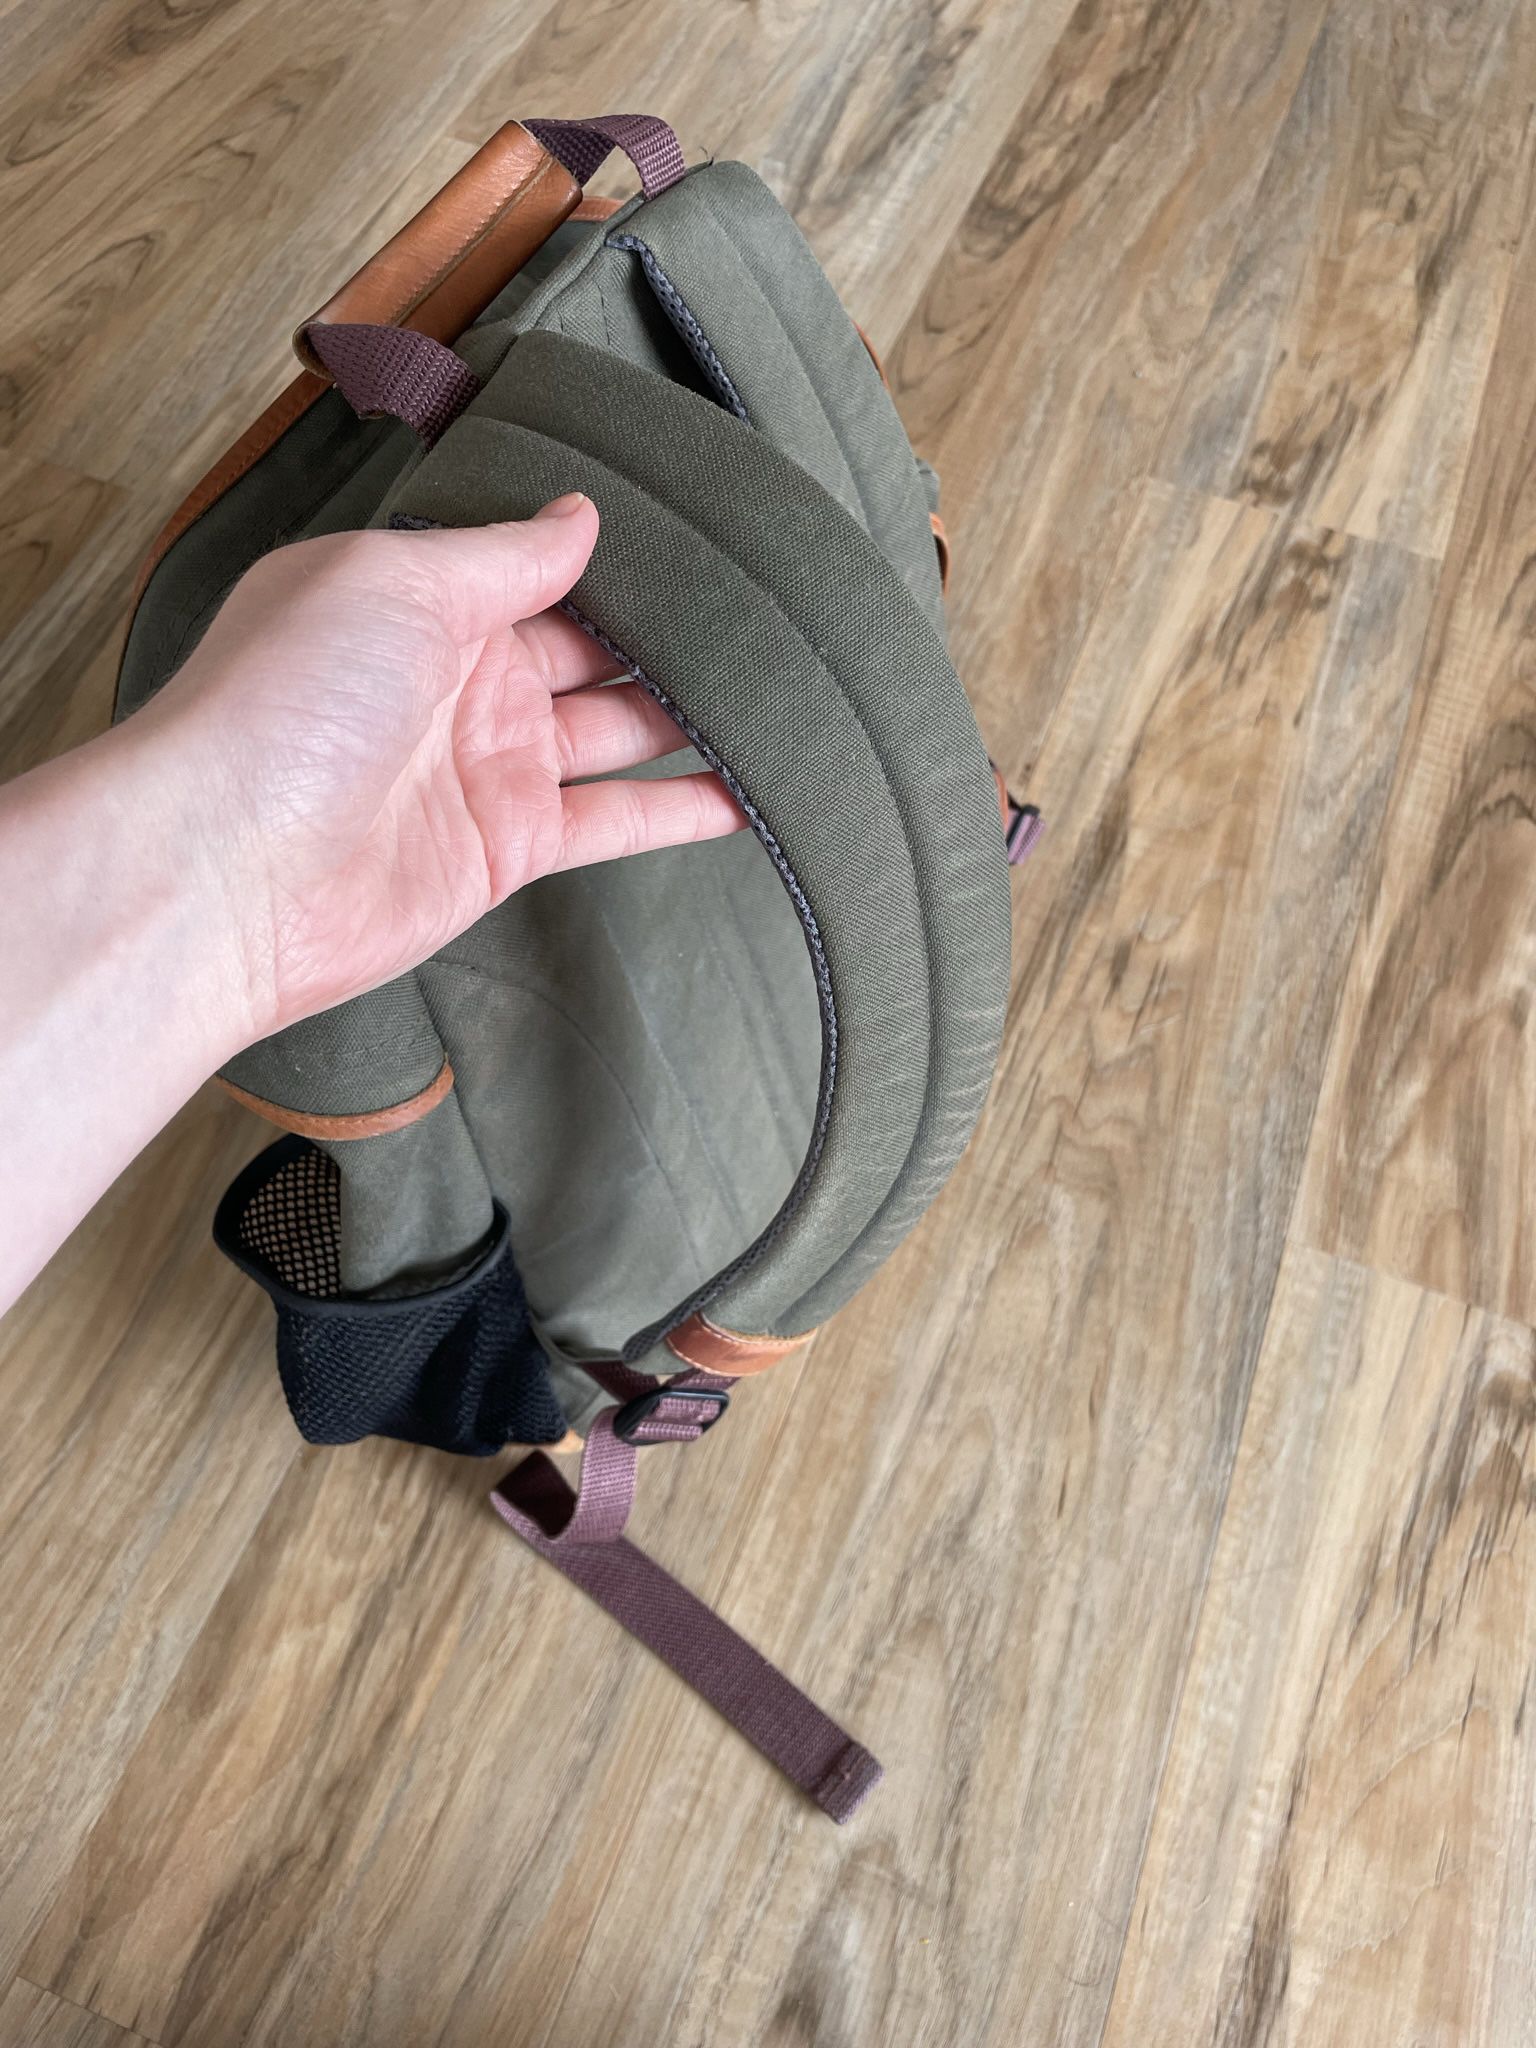 L.L. Bean Forest Green Safari Style Backpack